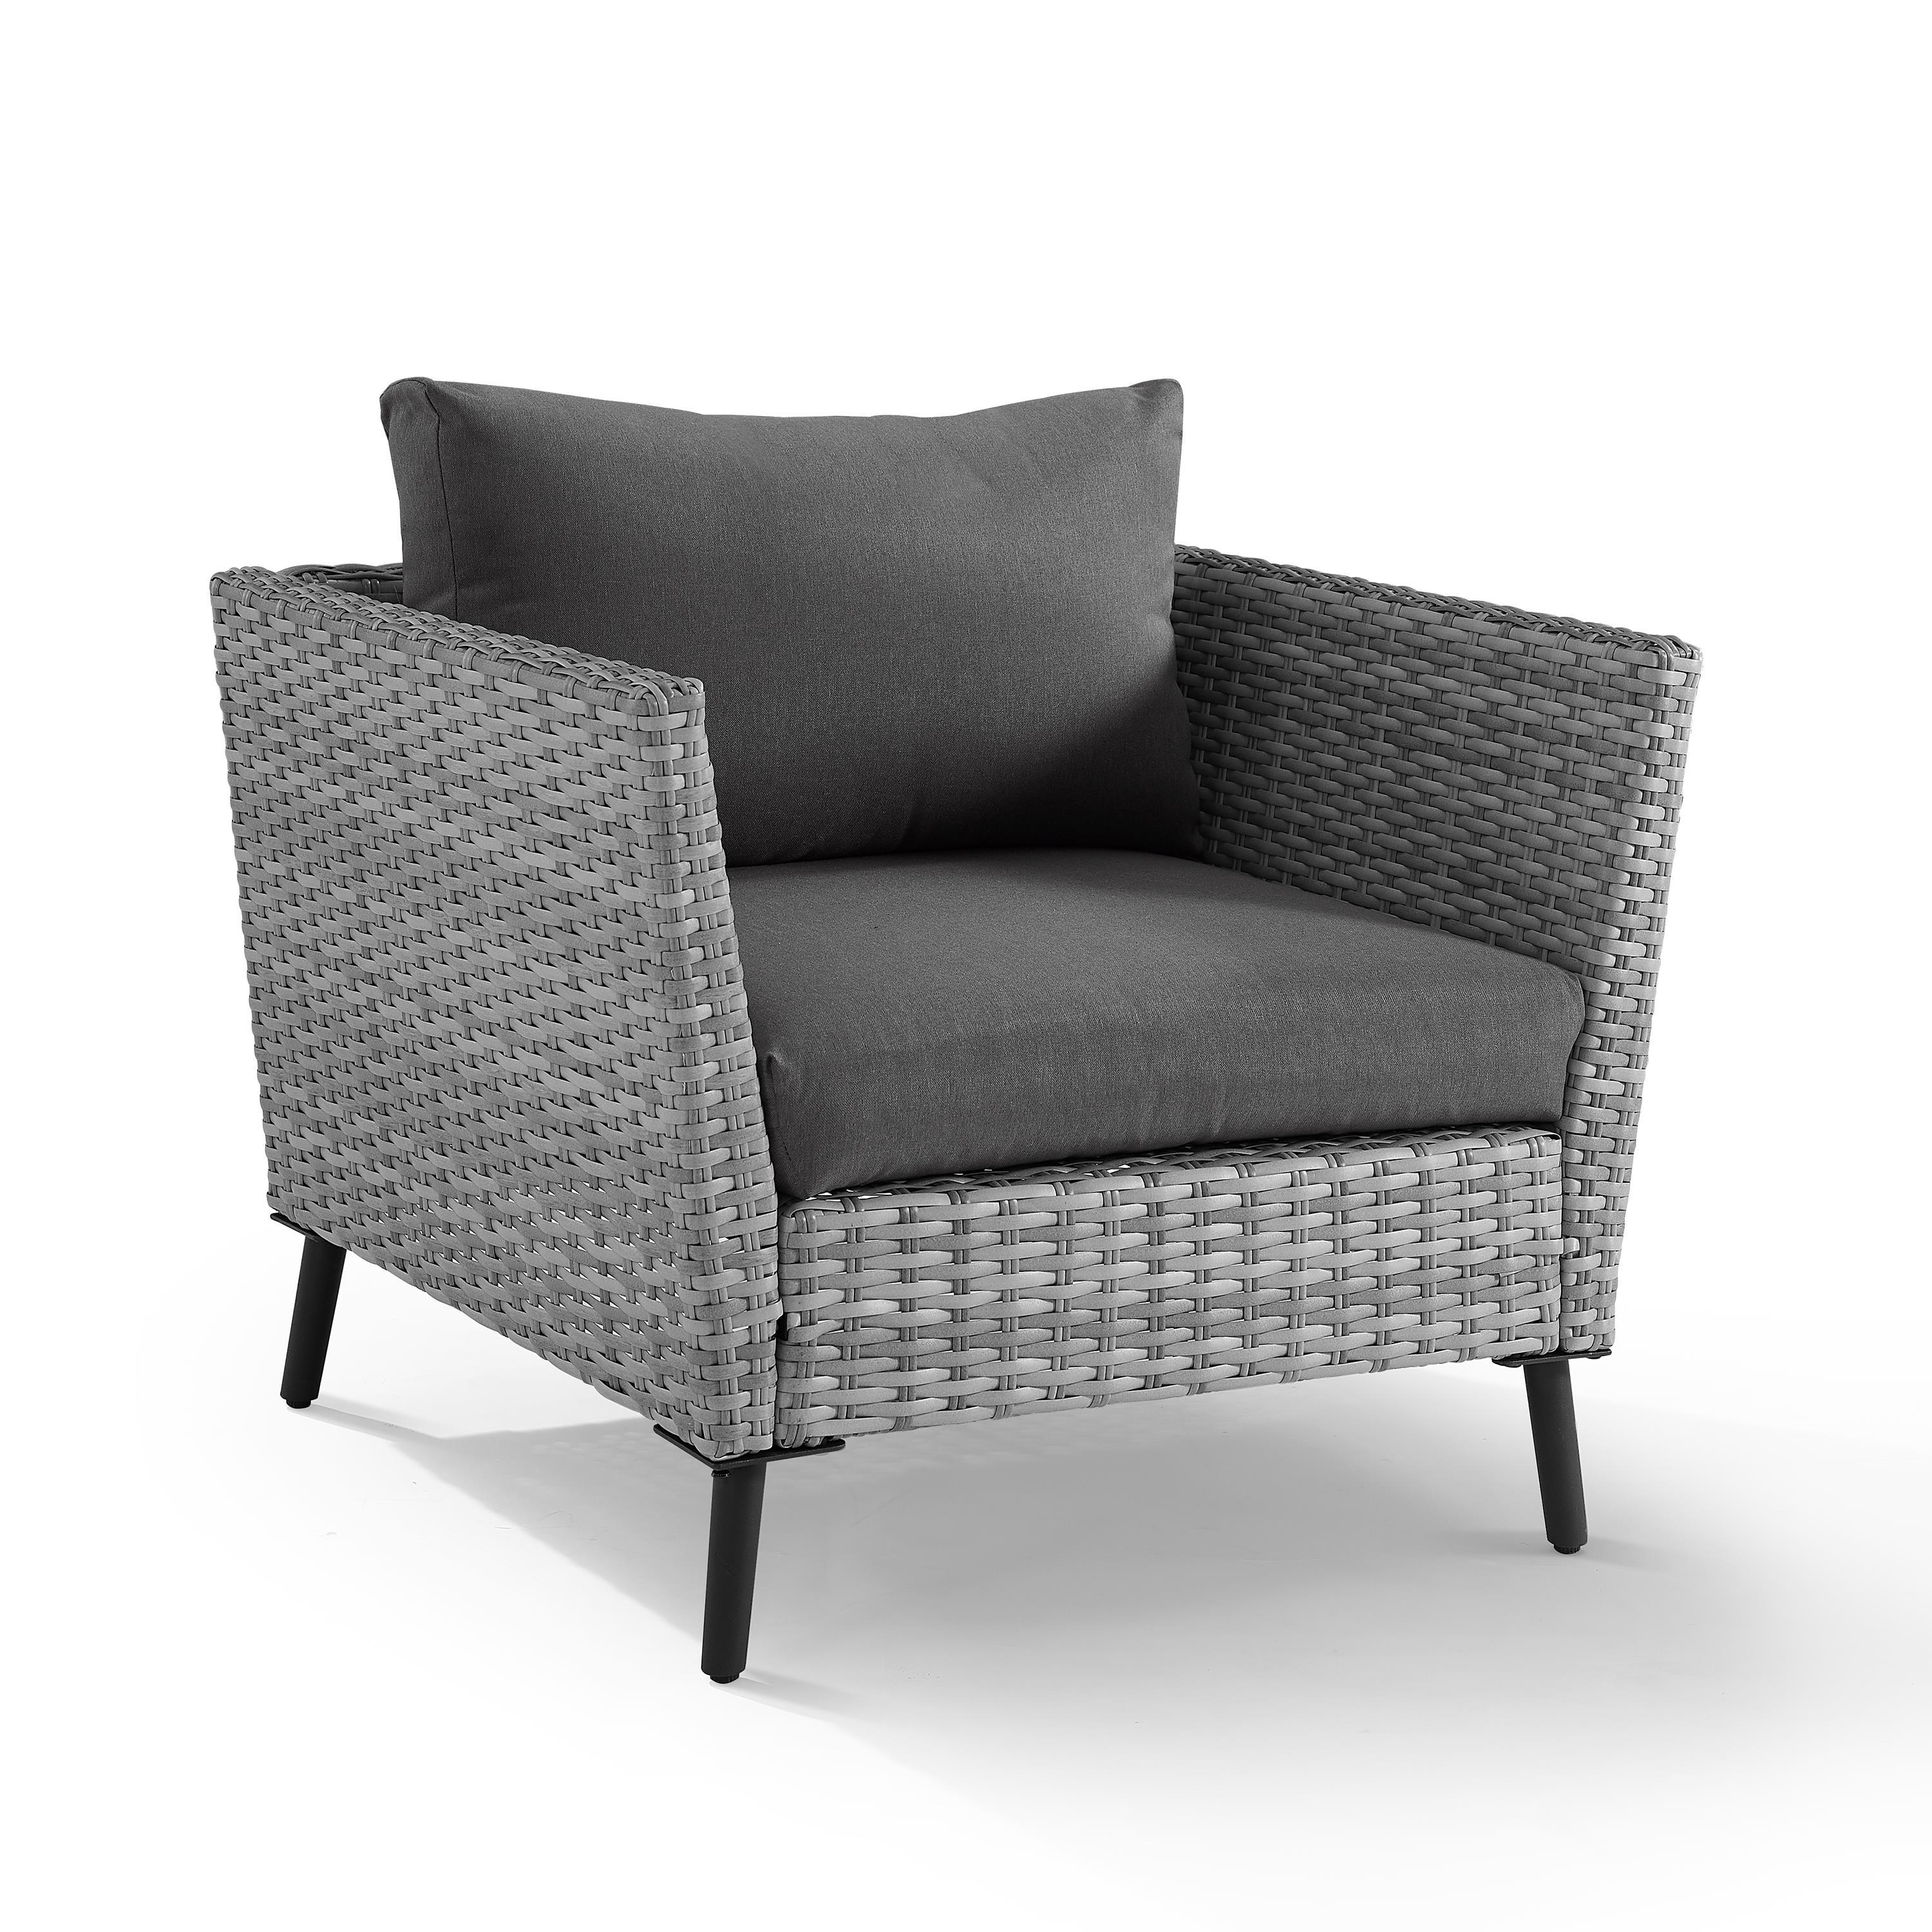 Crosley Richland Wicker Patio Arm Chair in Gray (Set of 2) - image 4 of 10